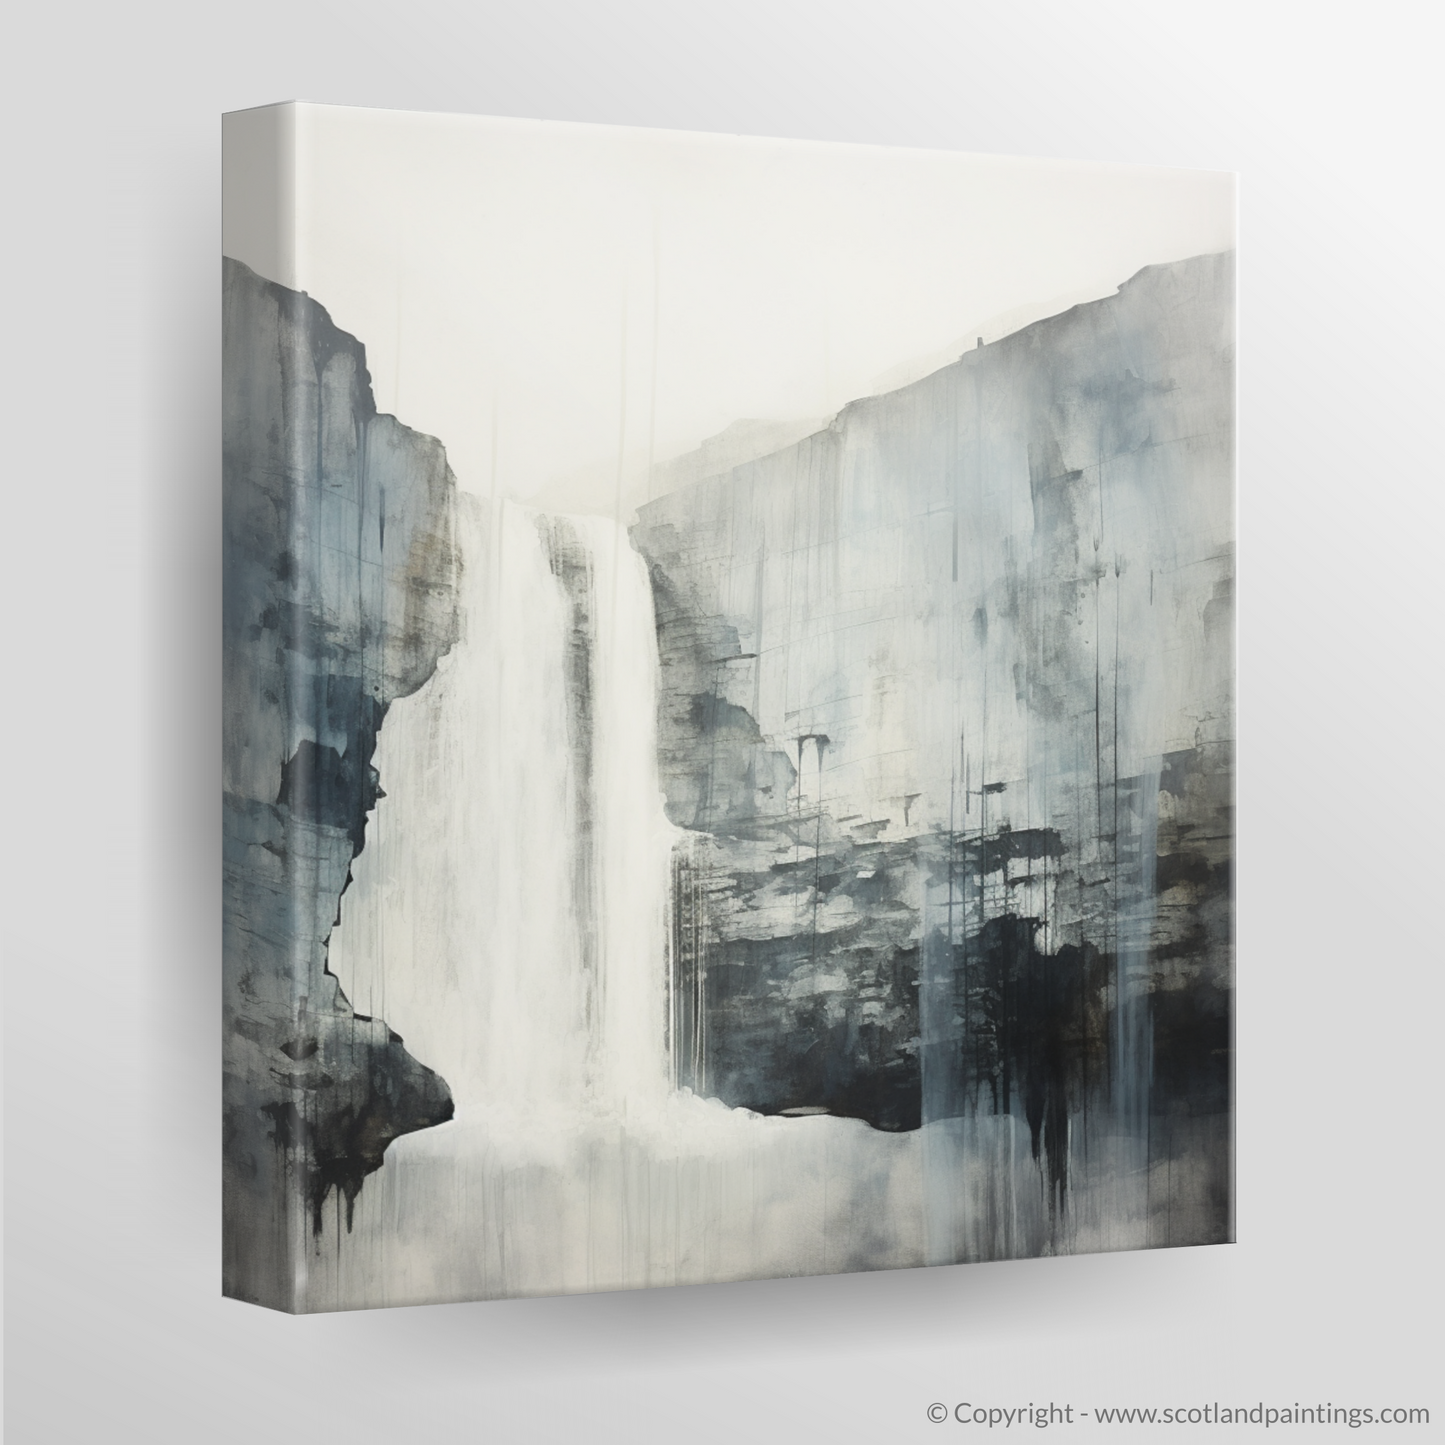 Ethereal Waters of Mealt Falls: An Abstract Vision